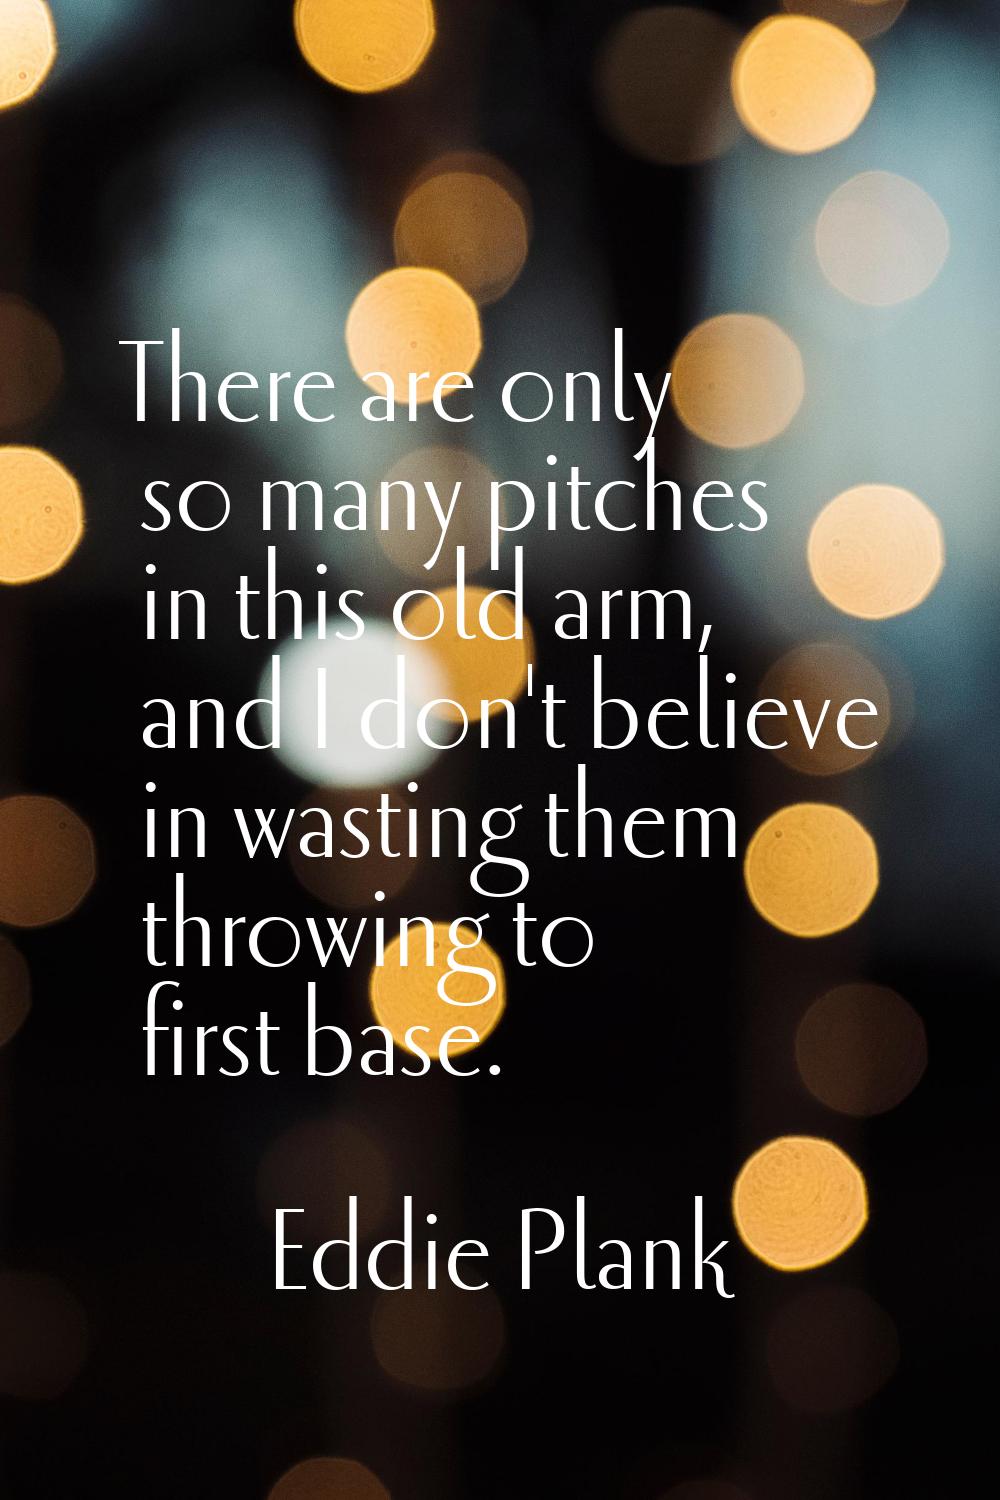 There are only so many pitches in this old arm, and I don't believe in wasting them throwing to fir